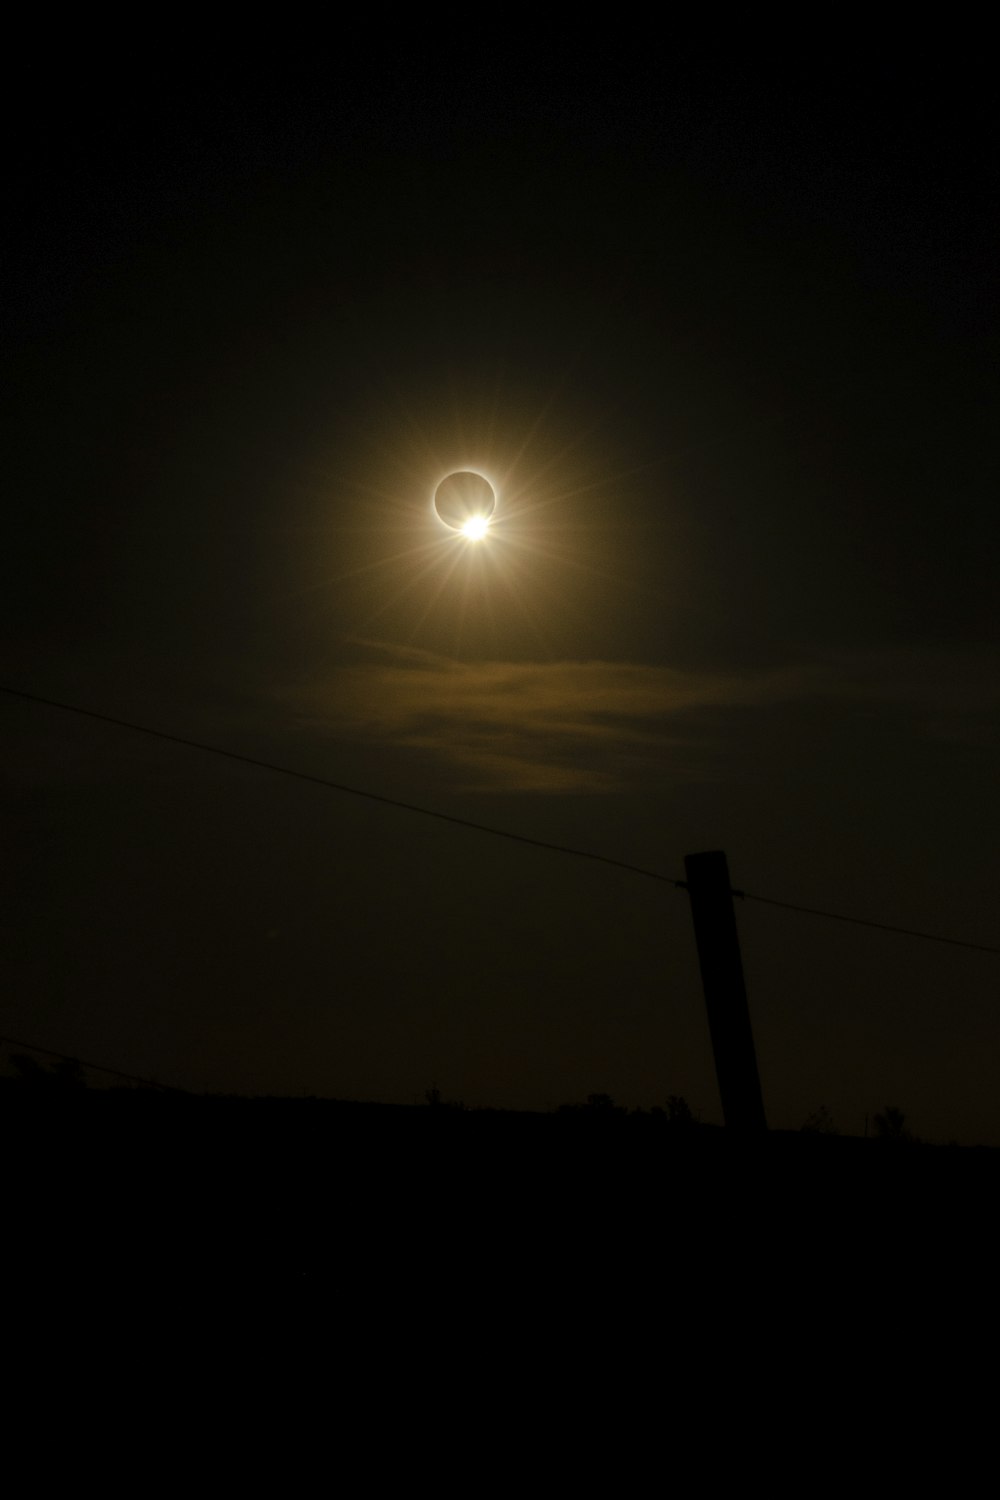 the eclipse is seen in the sky over a field